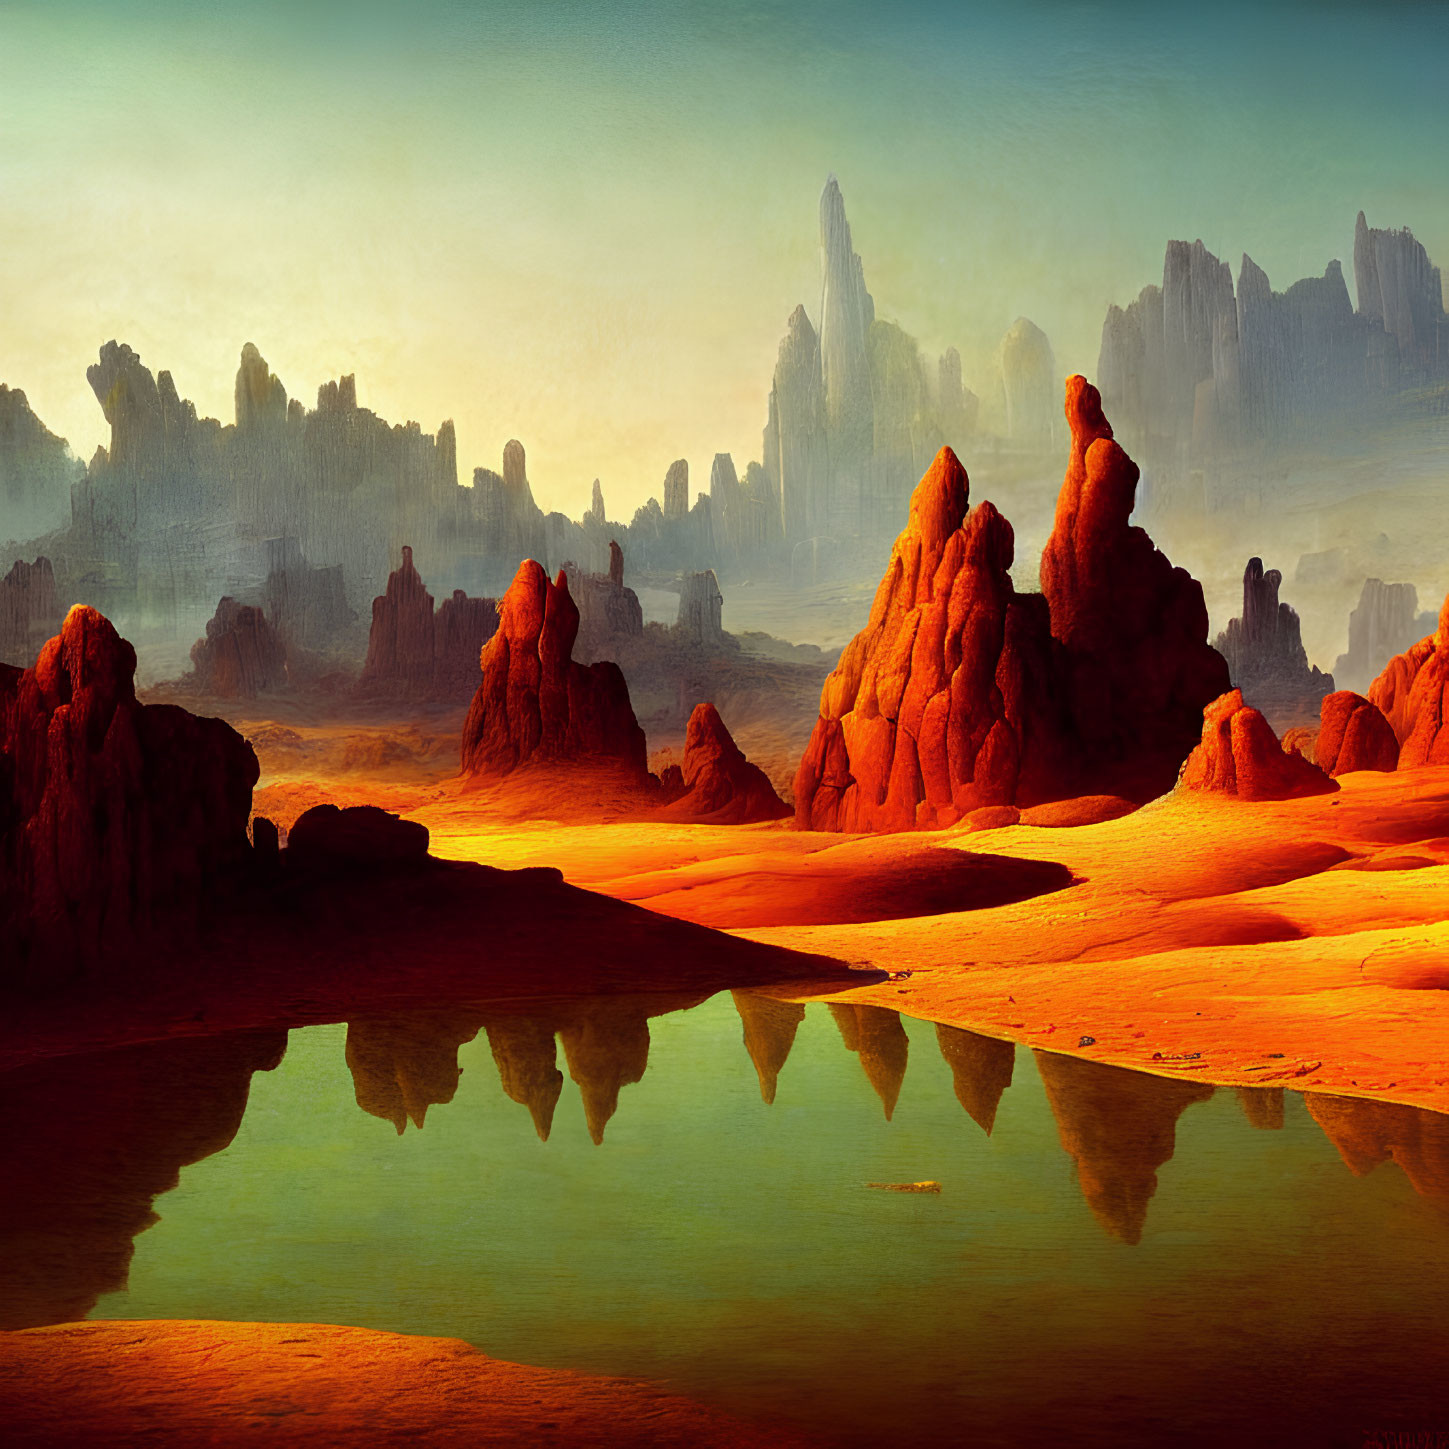 Alien landscape with towering red rock formations and calm water reflections